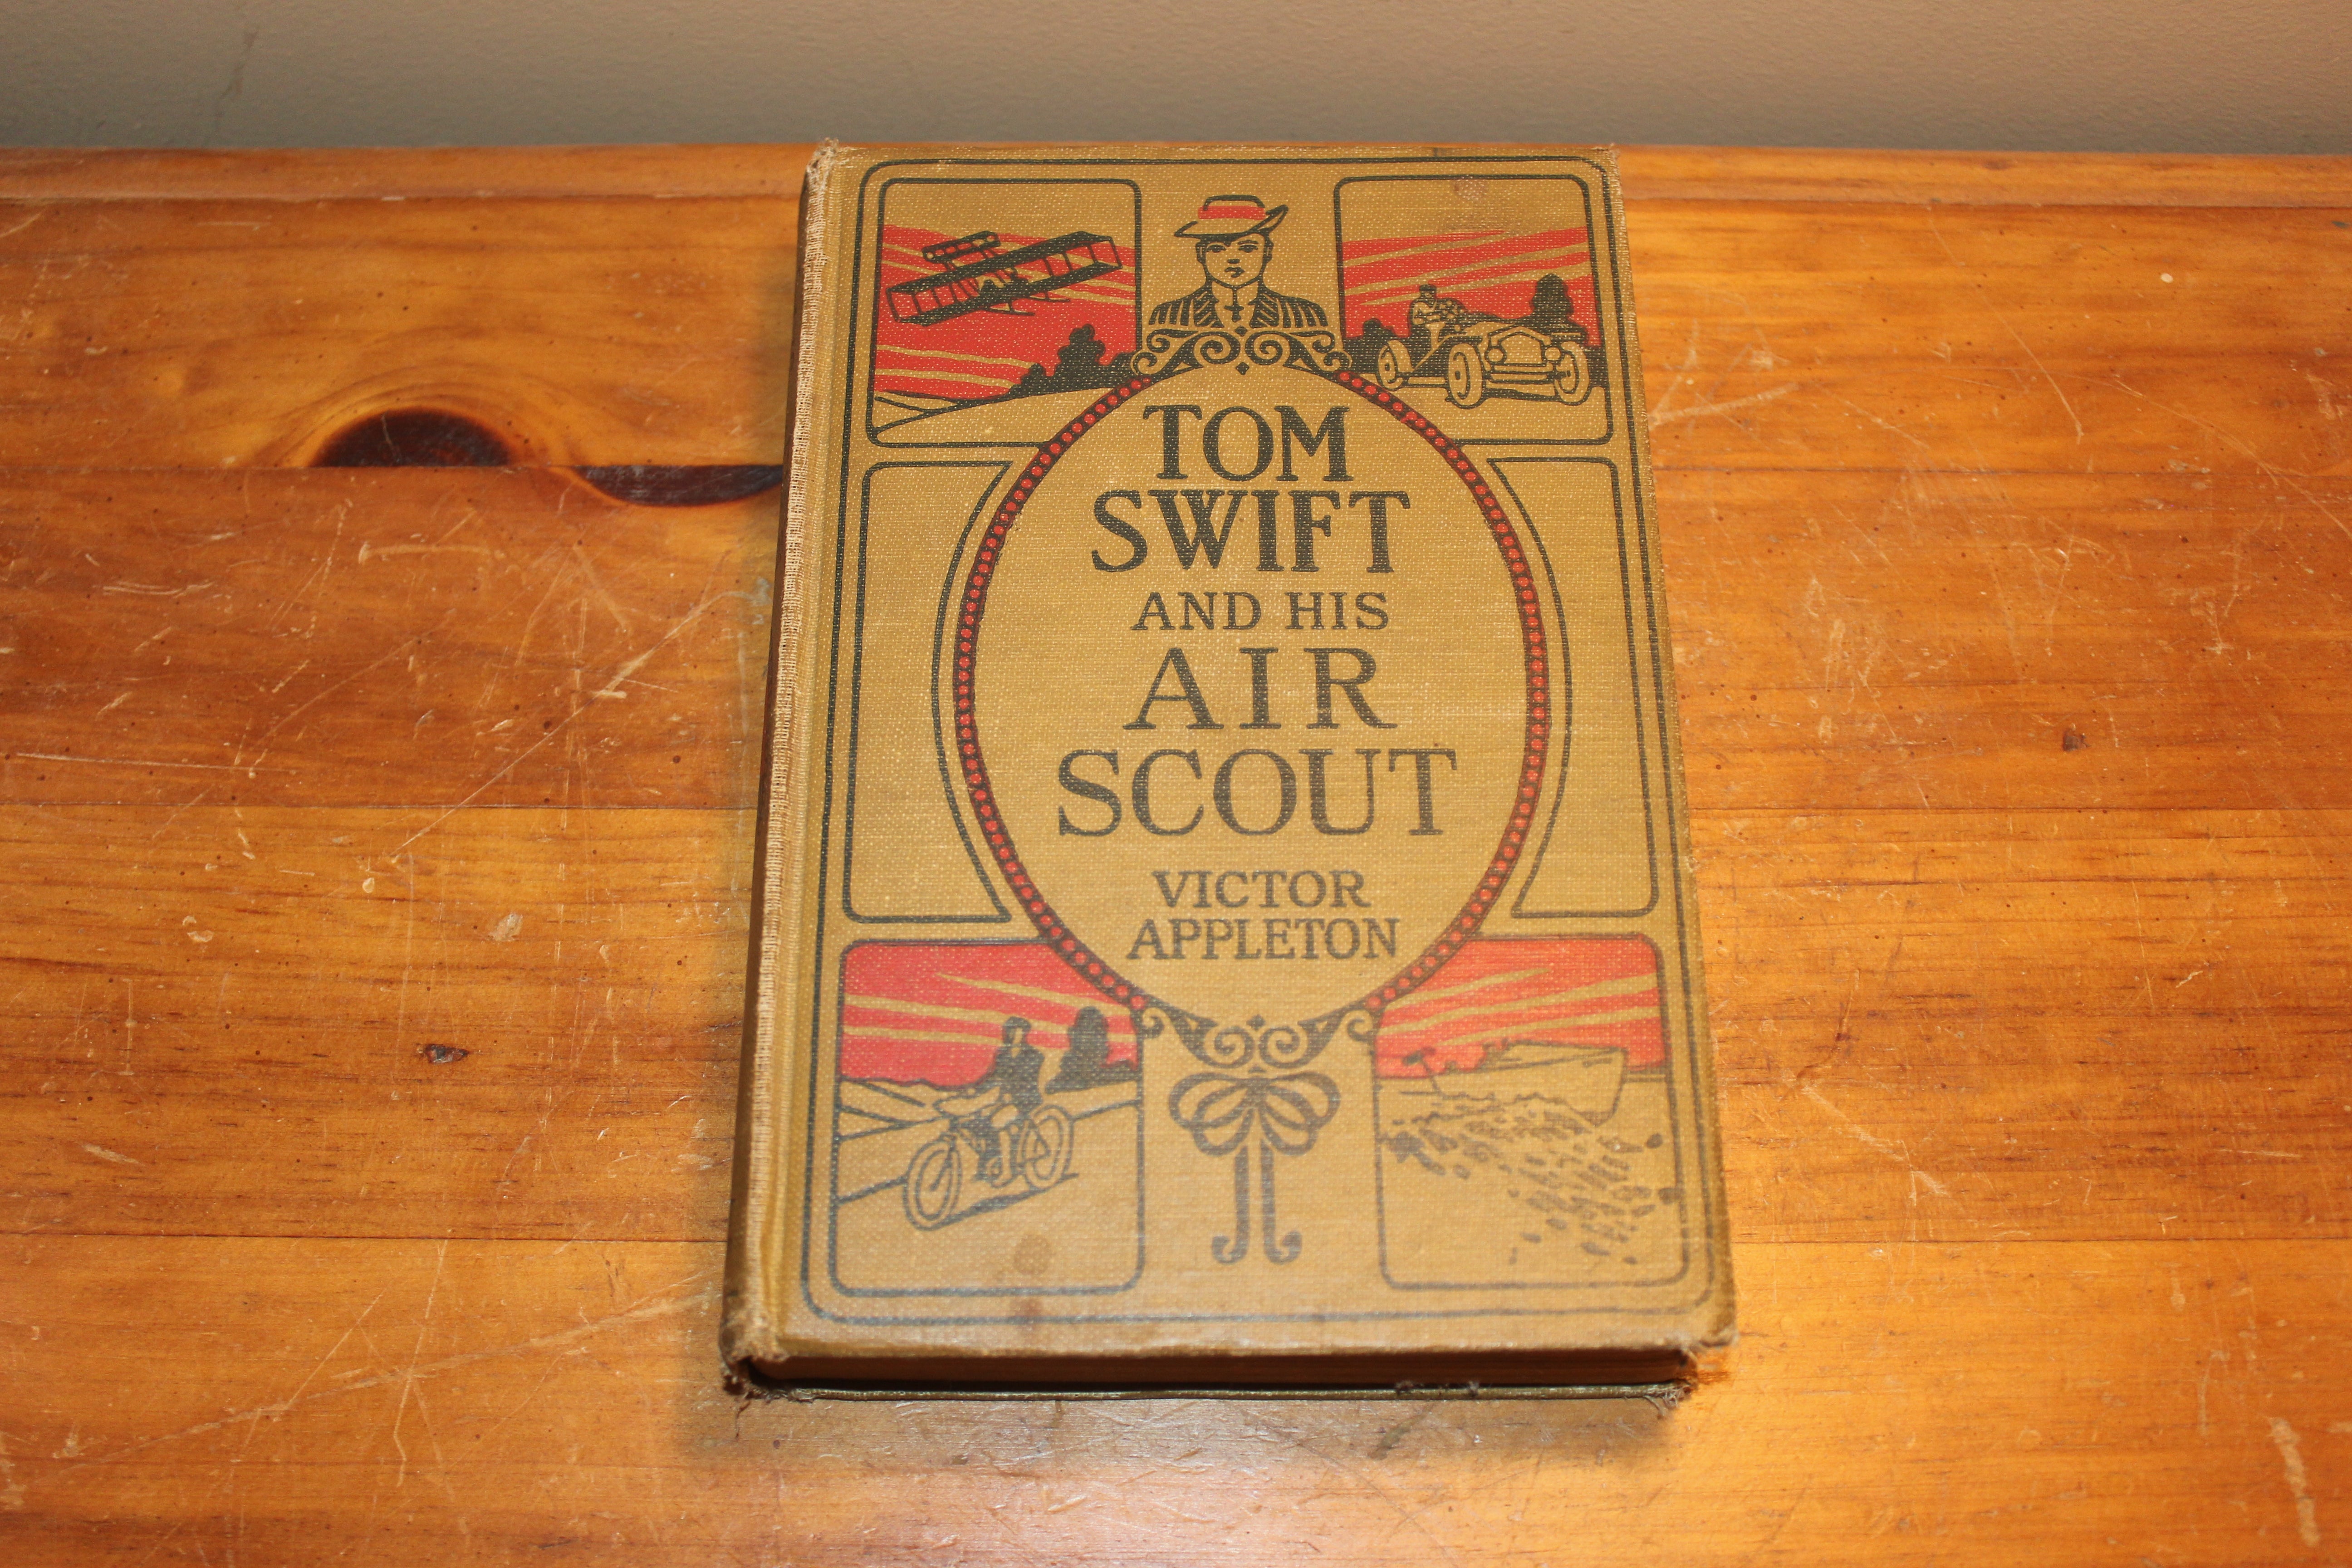 Tom Swift and His Air Scout - 1919